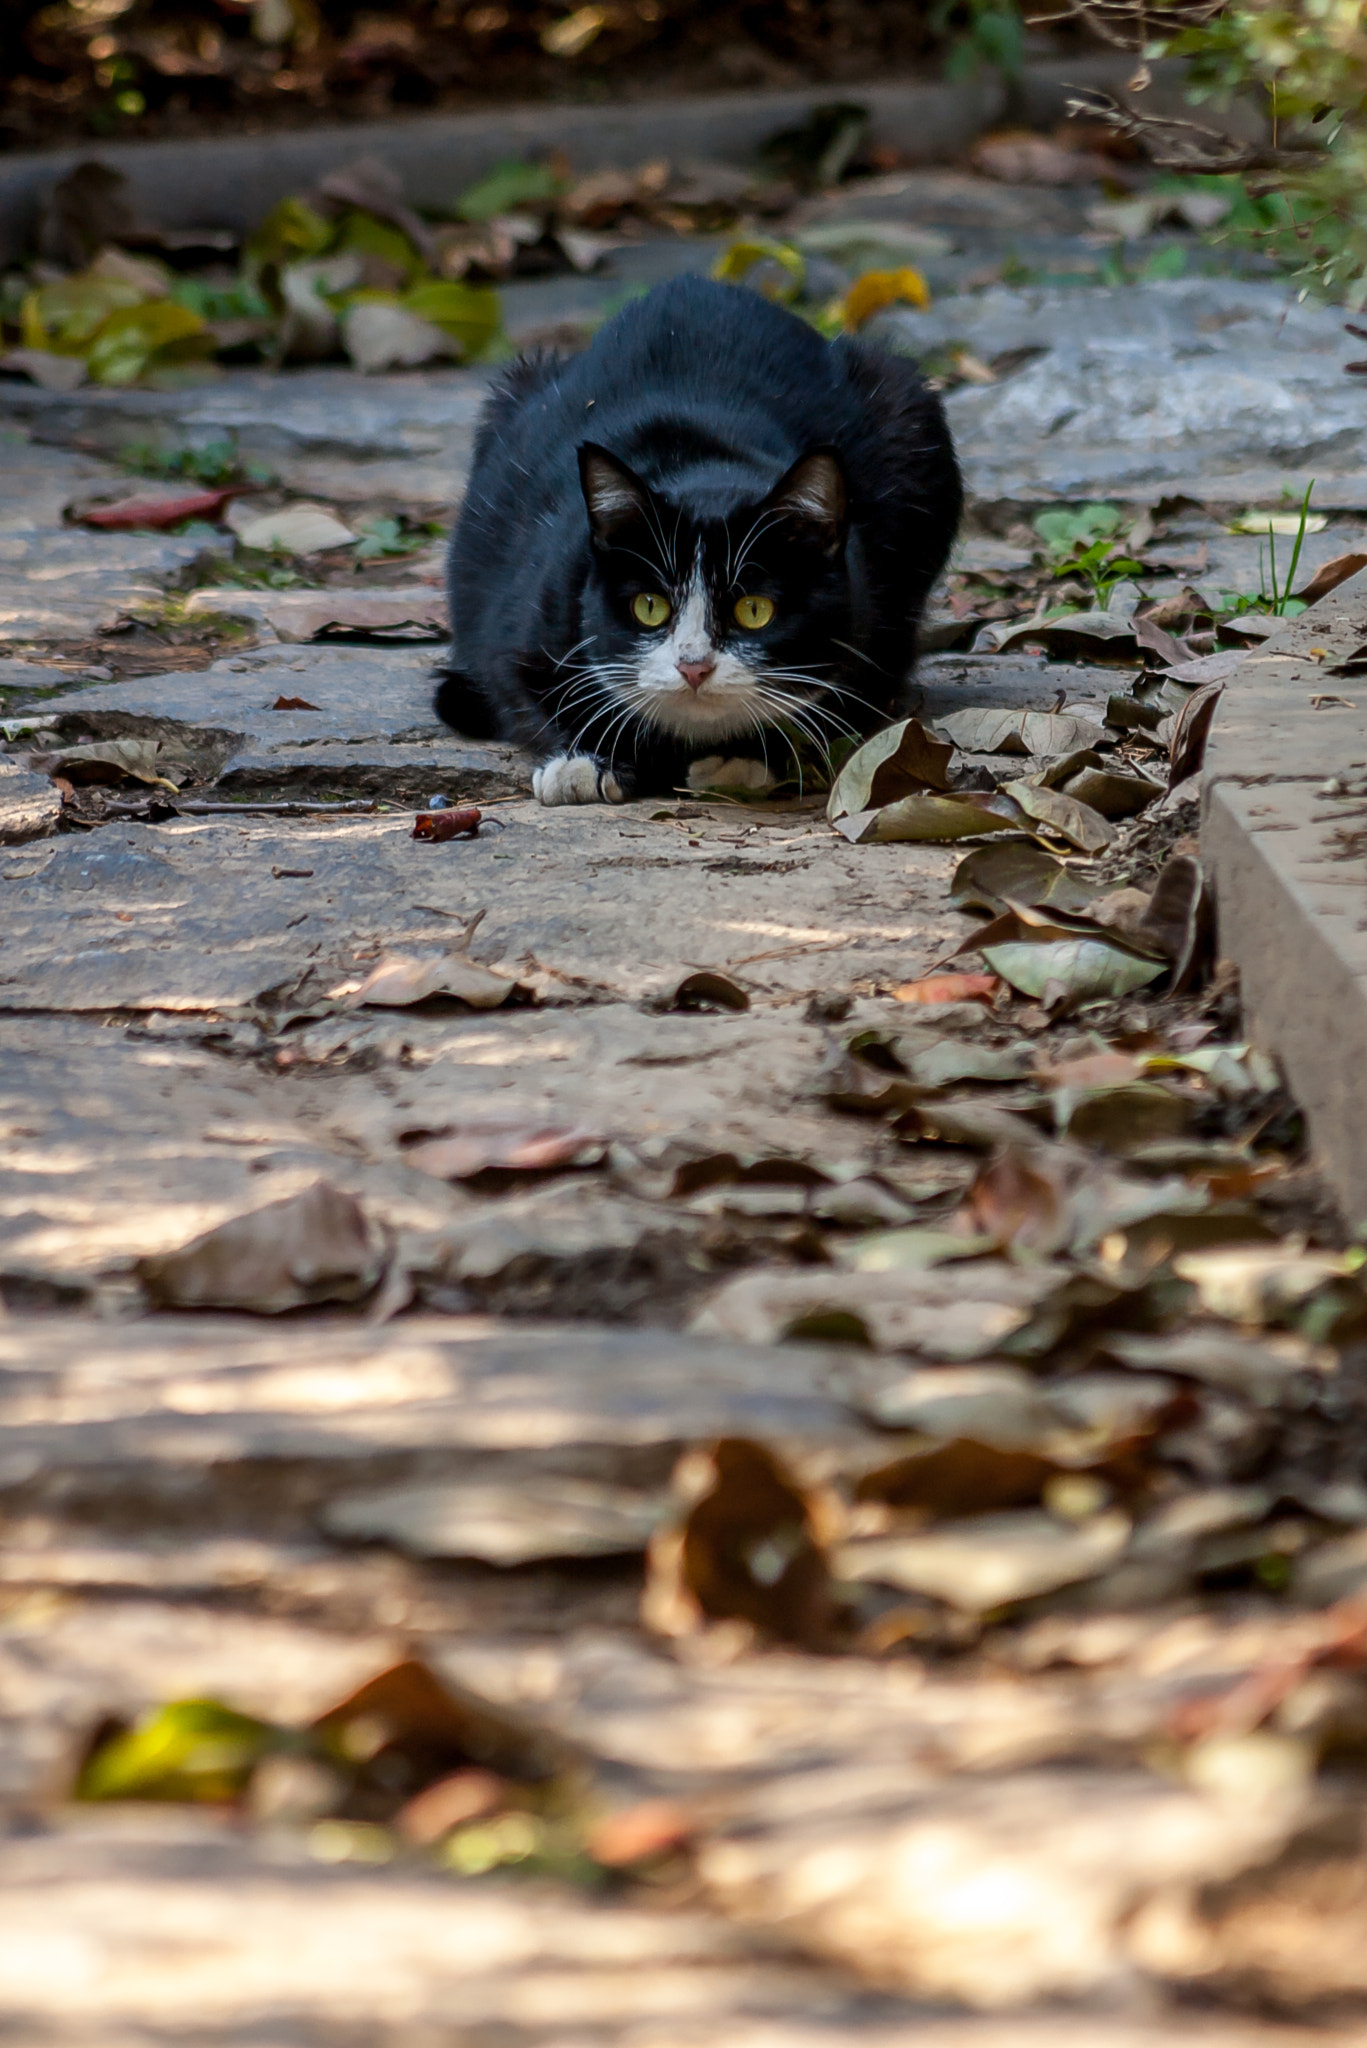 Pentax *ist DS2 sample photo. A crouching stray cat photography